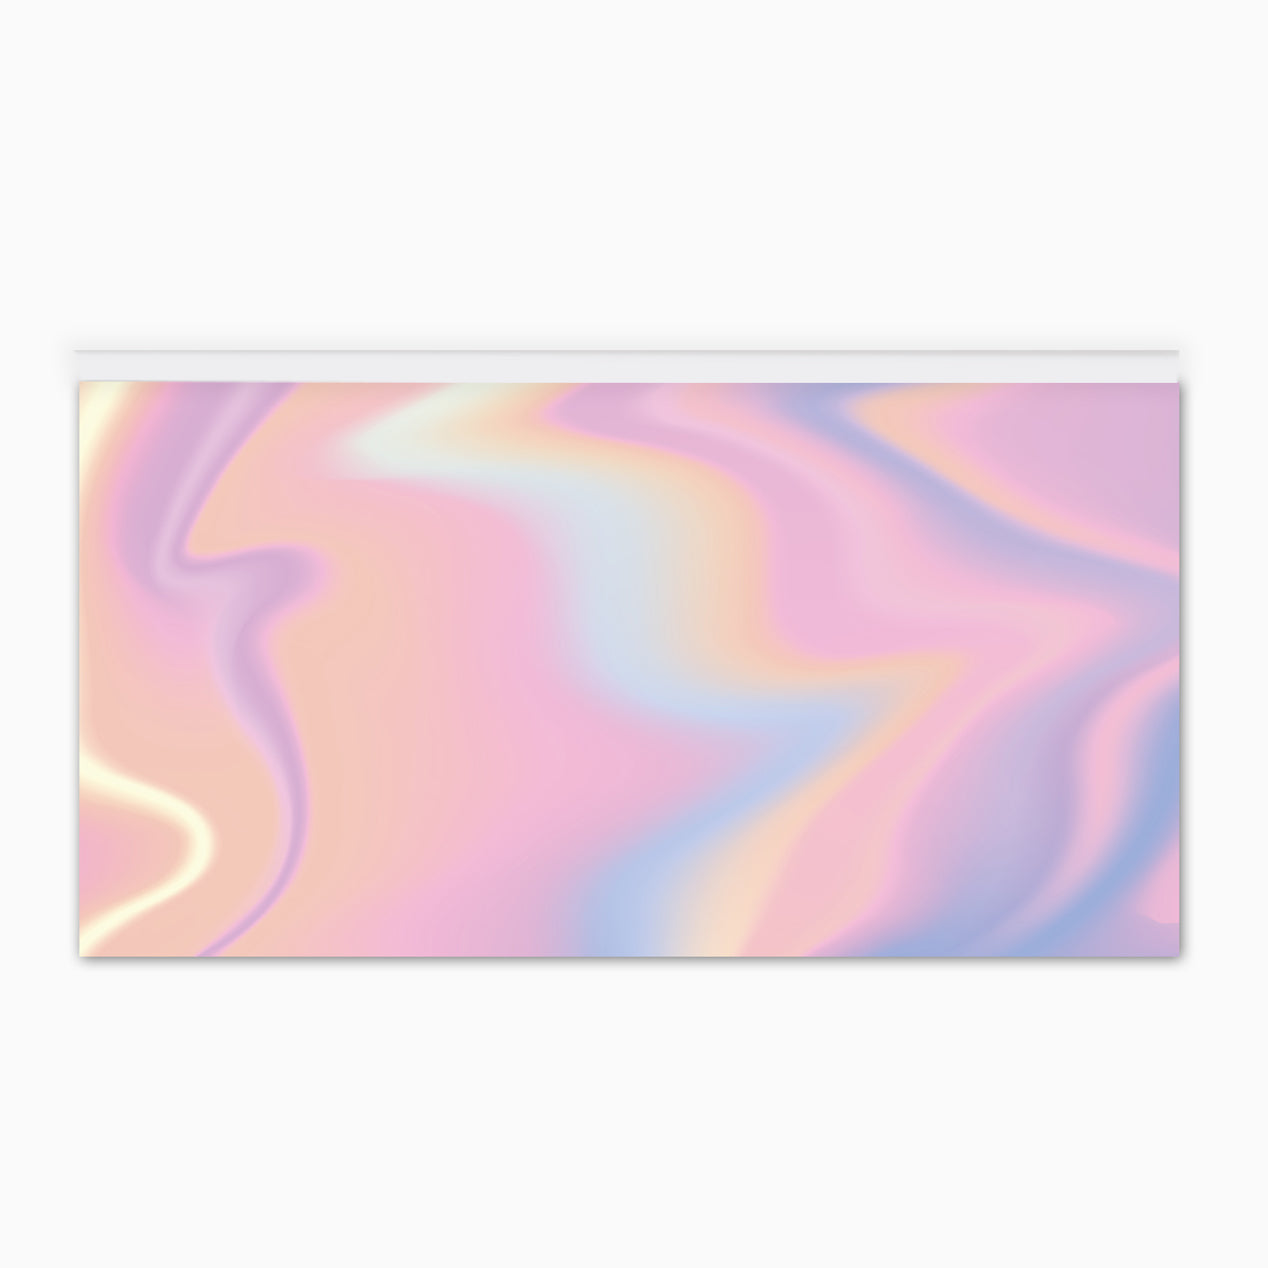 Holographic - 8 Eye Palette